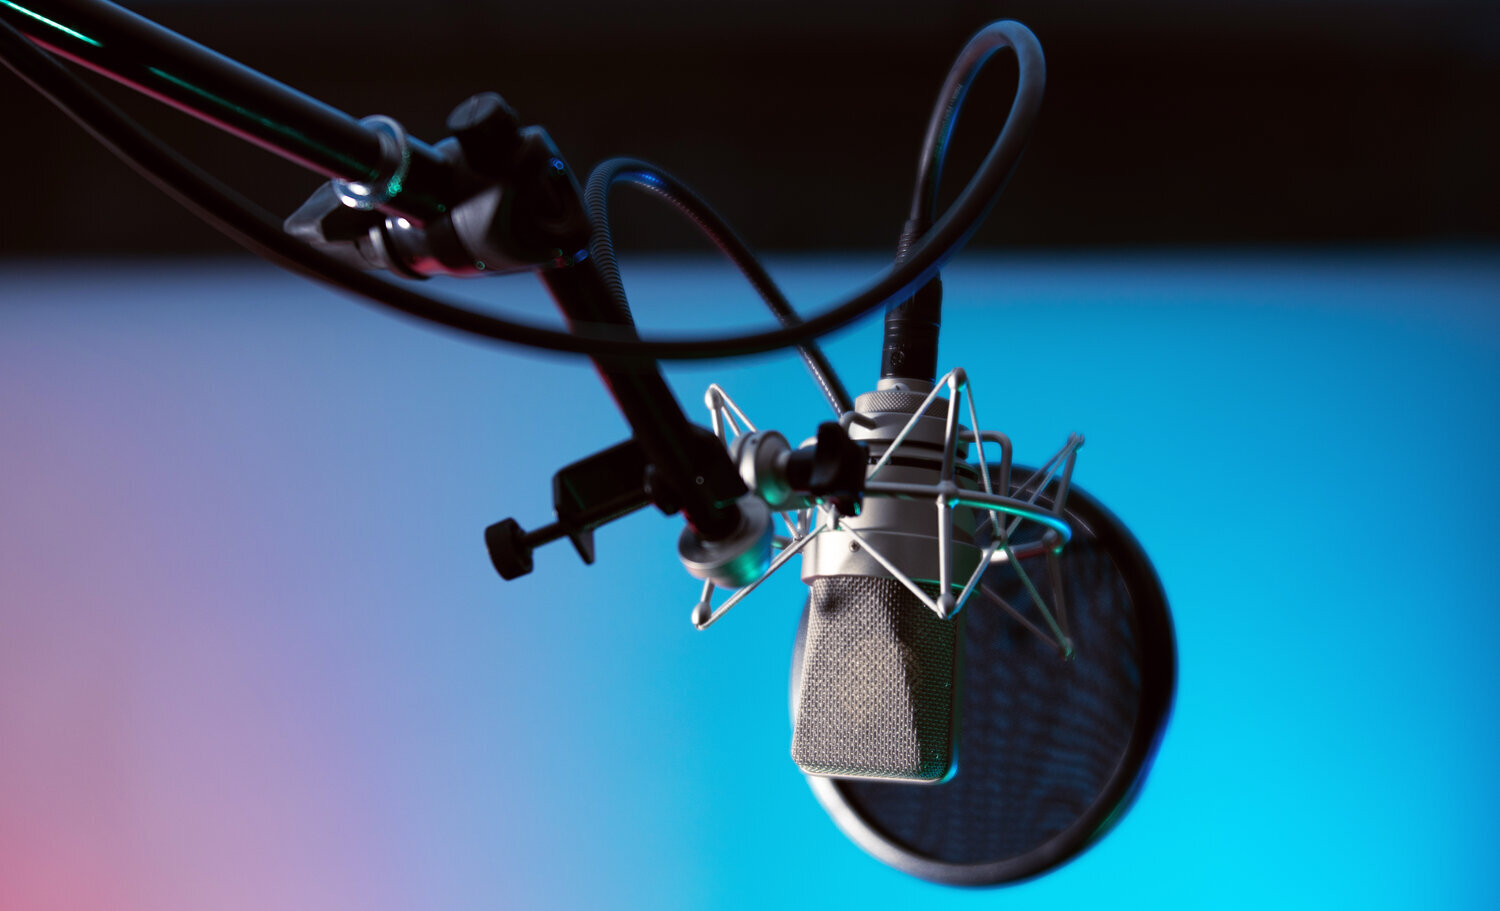 What to consider when recording a voice-over or podcast